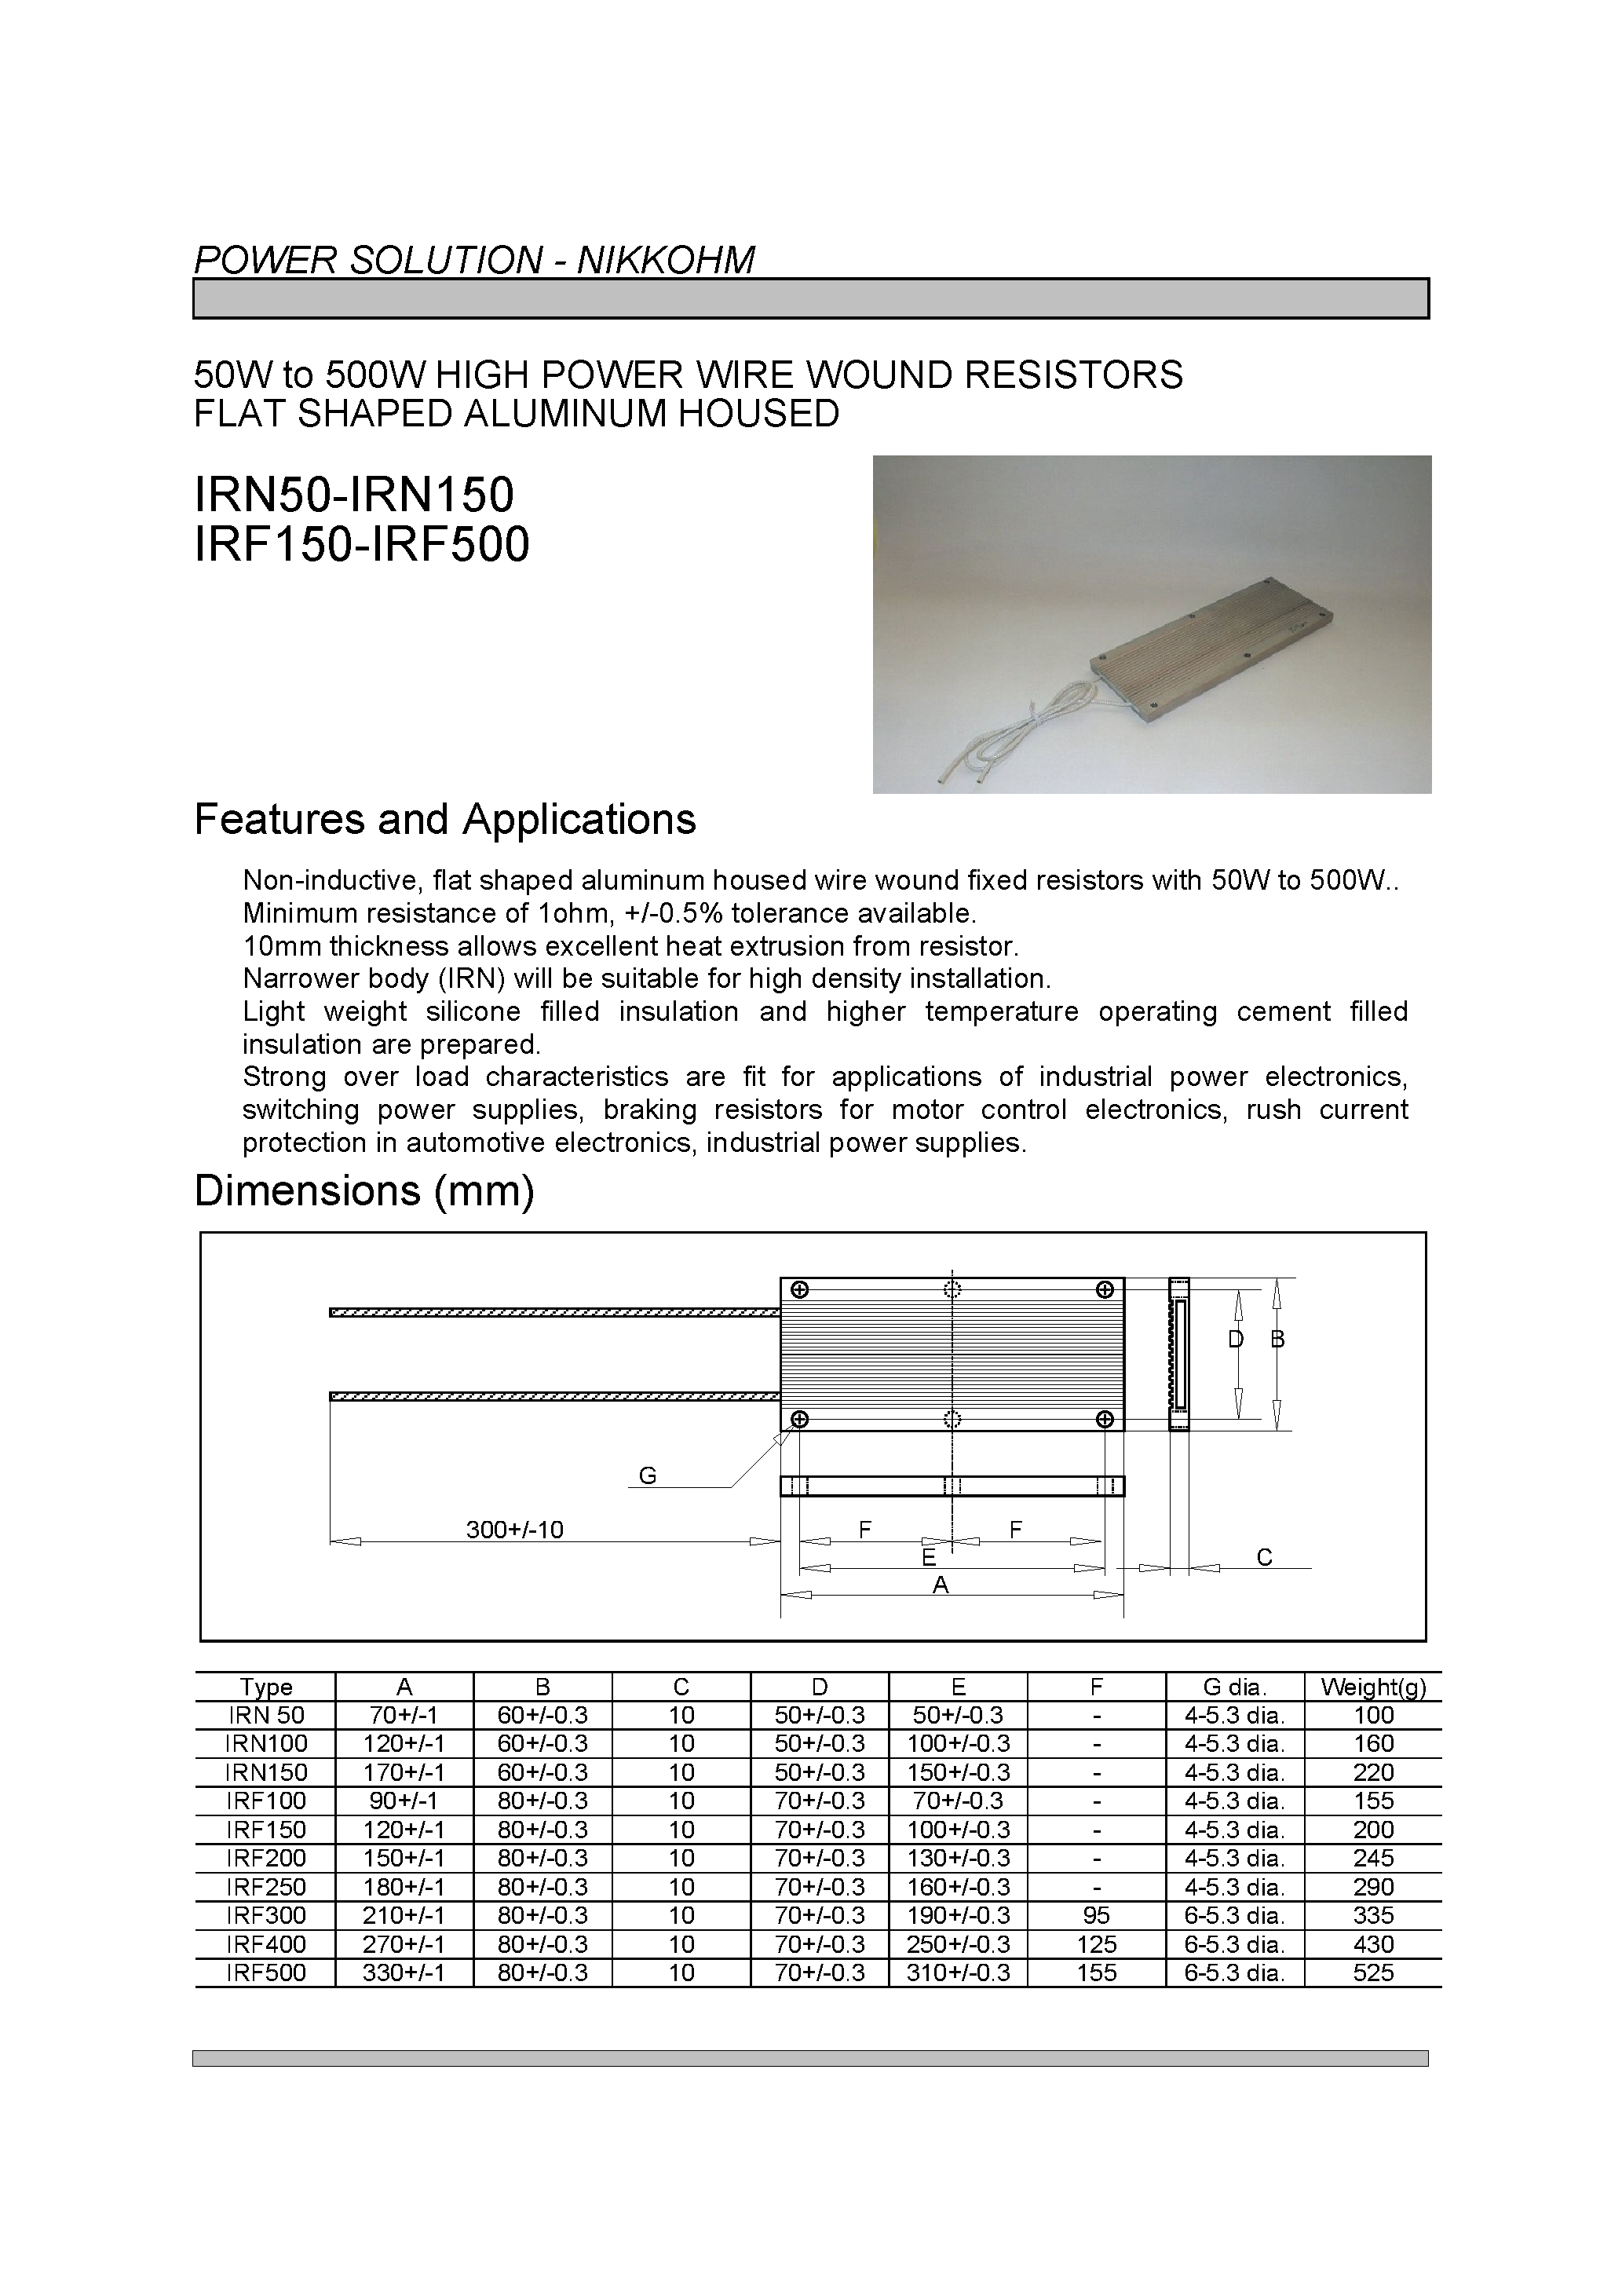 Даташит IRF100 - (IRF150 - IRF500) 50W to 500W HIGH POWER WIRE WOUND RESISTORS FLAT SHAPED ALUMINUM HOUSED страница 1